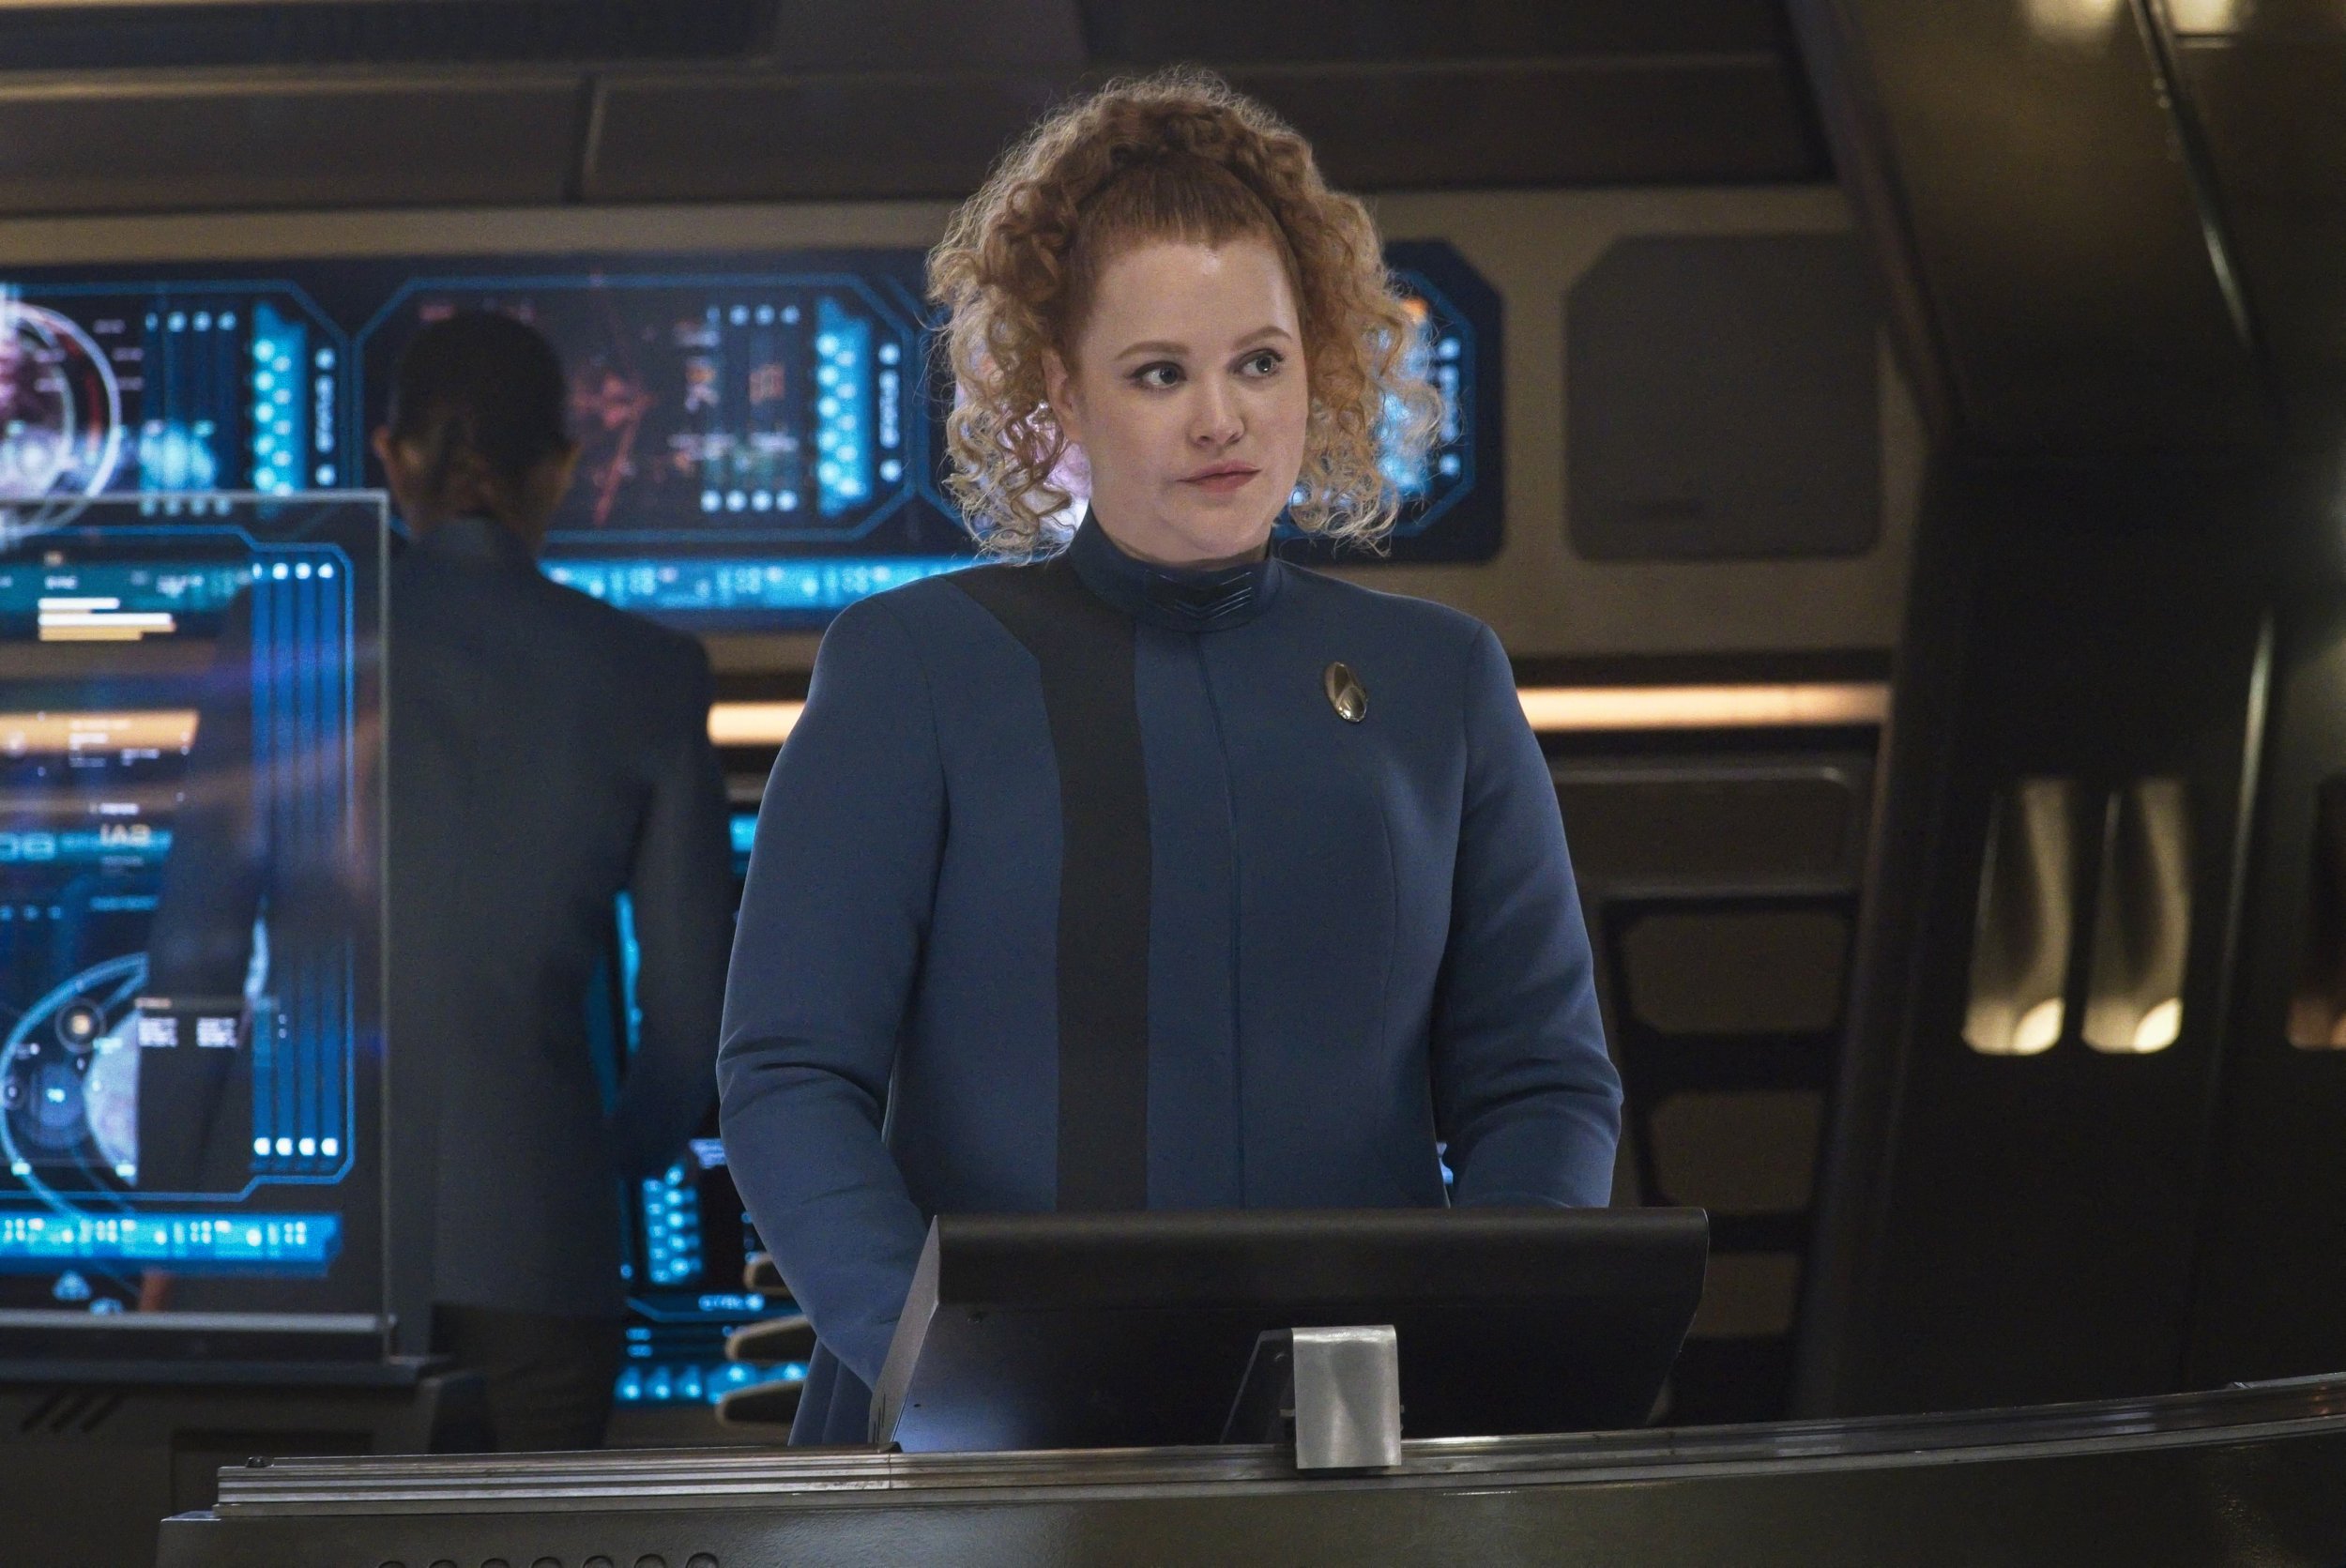   Pictured: Mary Wiseman as Tilly of the Paramount+ original series STAR TREK: DISCOVERY. Photo Cr: Michael Gibson/ViacomCBS © 2021 ViacomCBS. All Rights Reserved.  